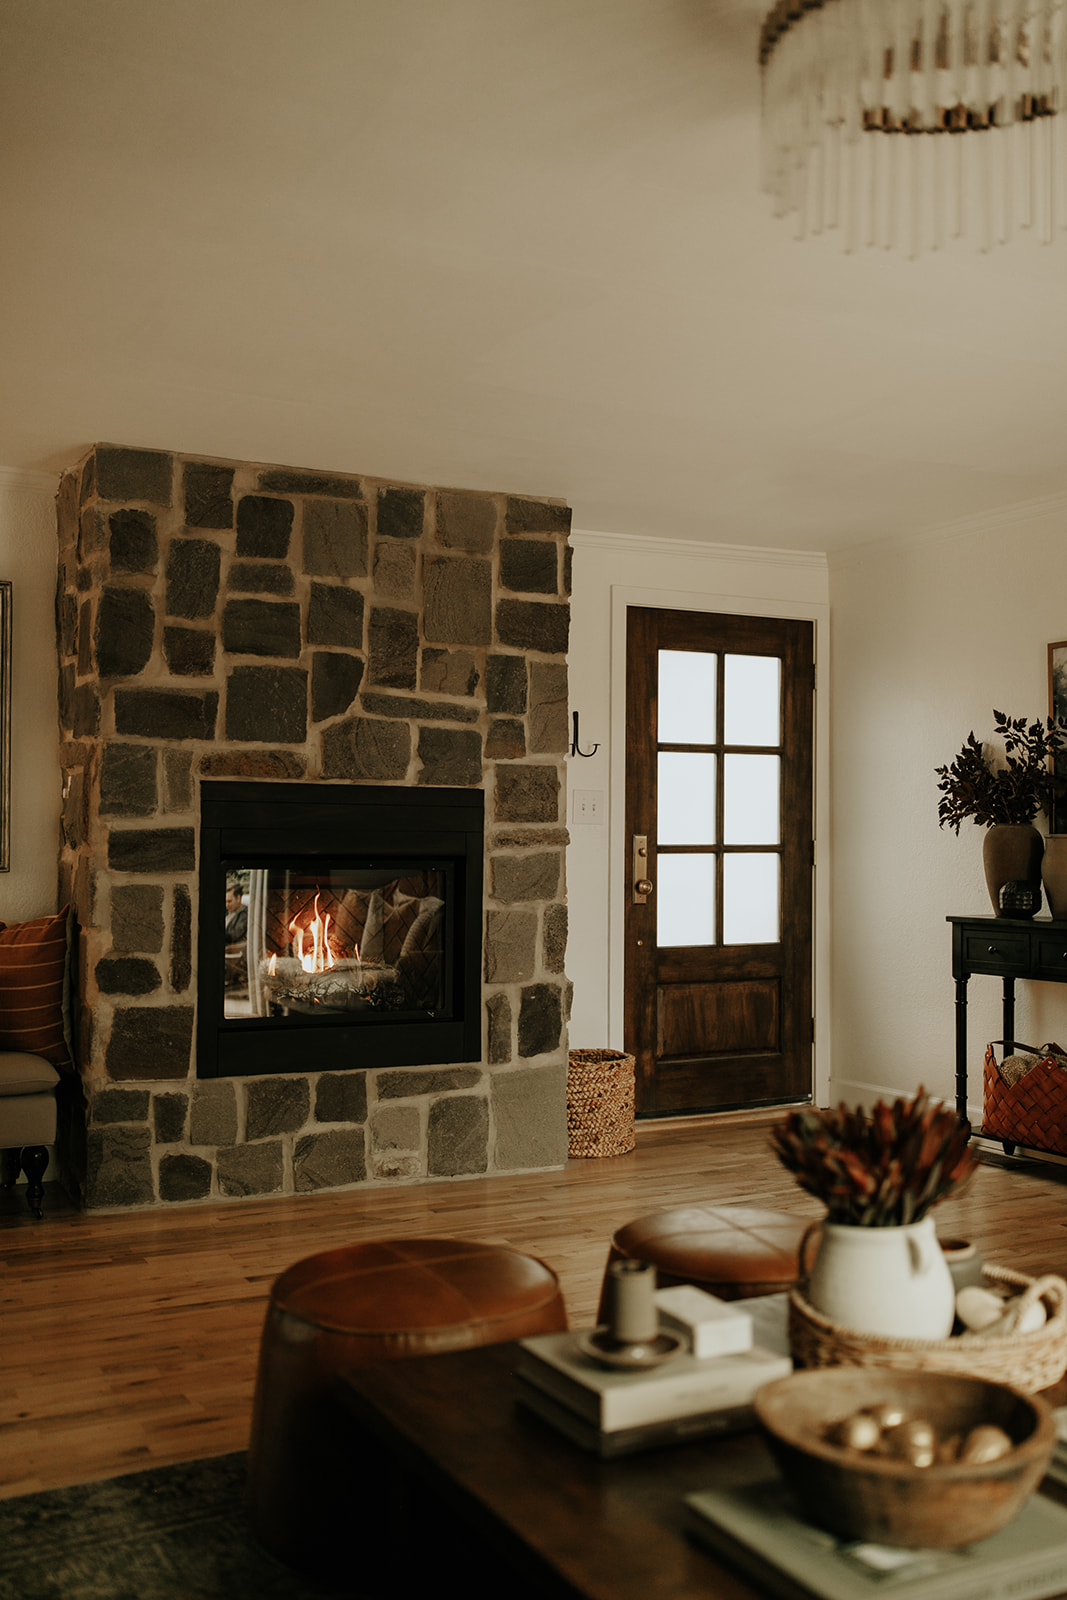 An indoor setting with a coffee table, fireplace with brick and wood front door